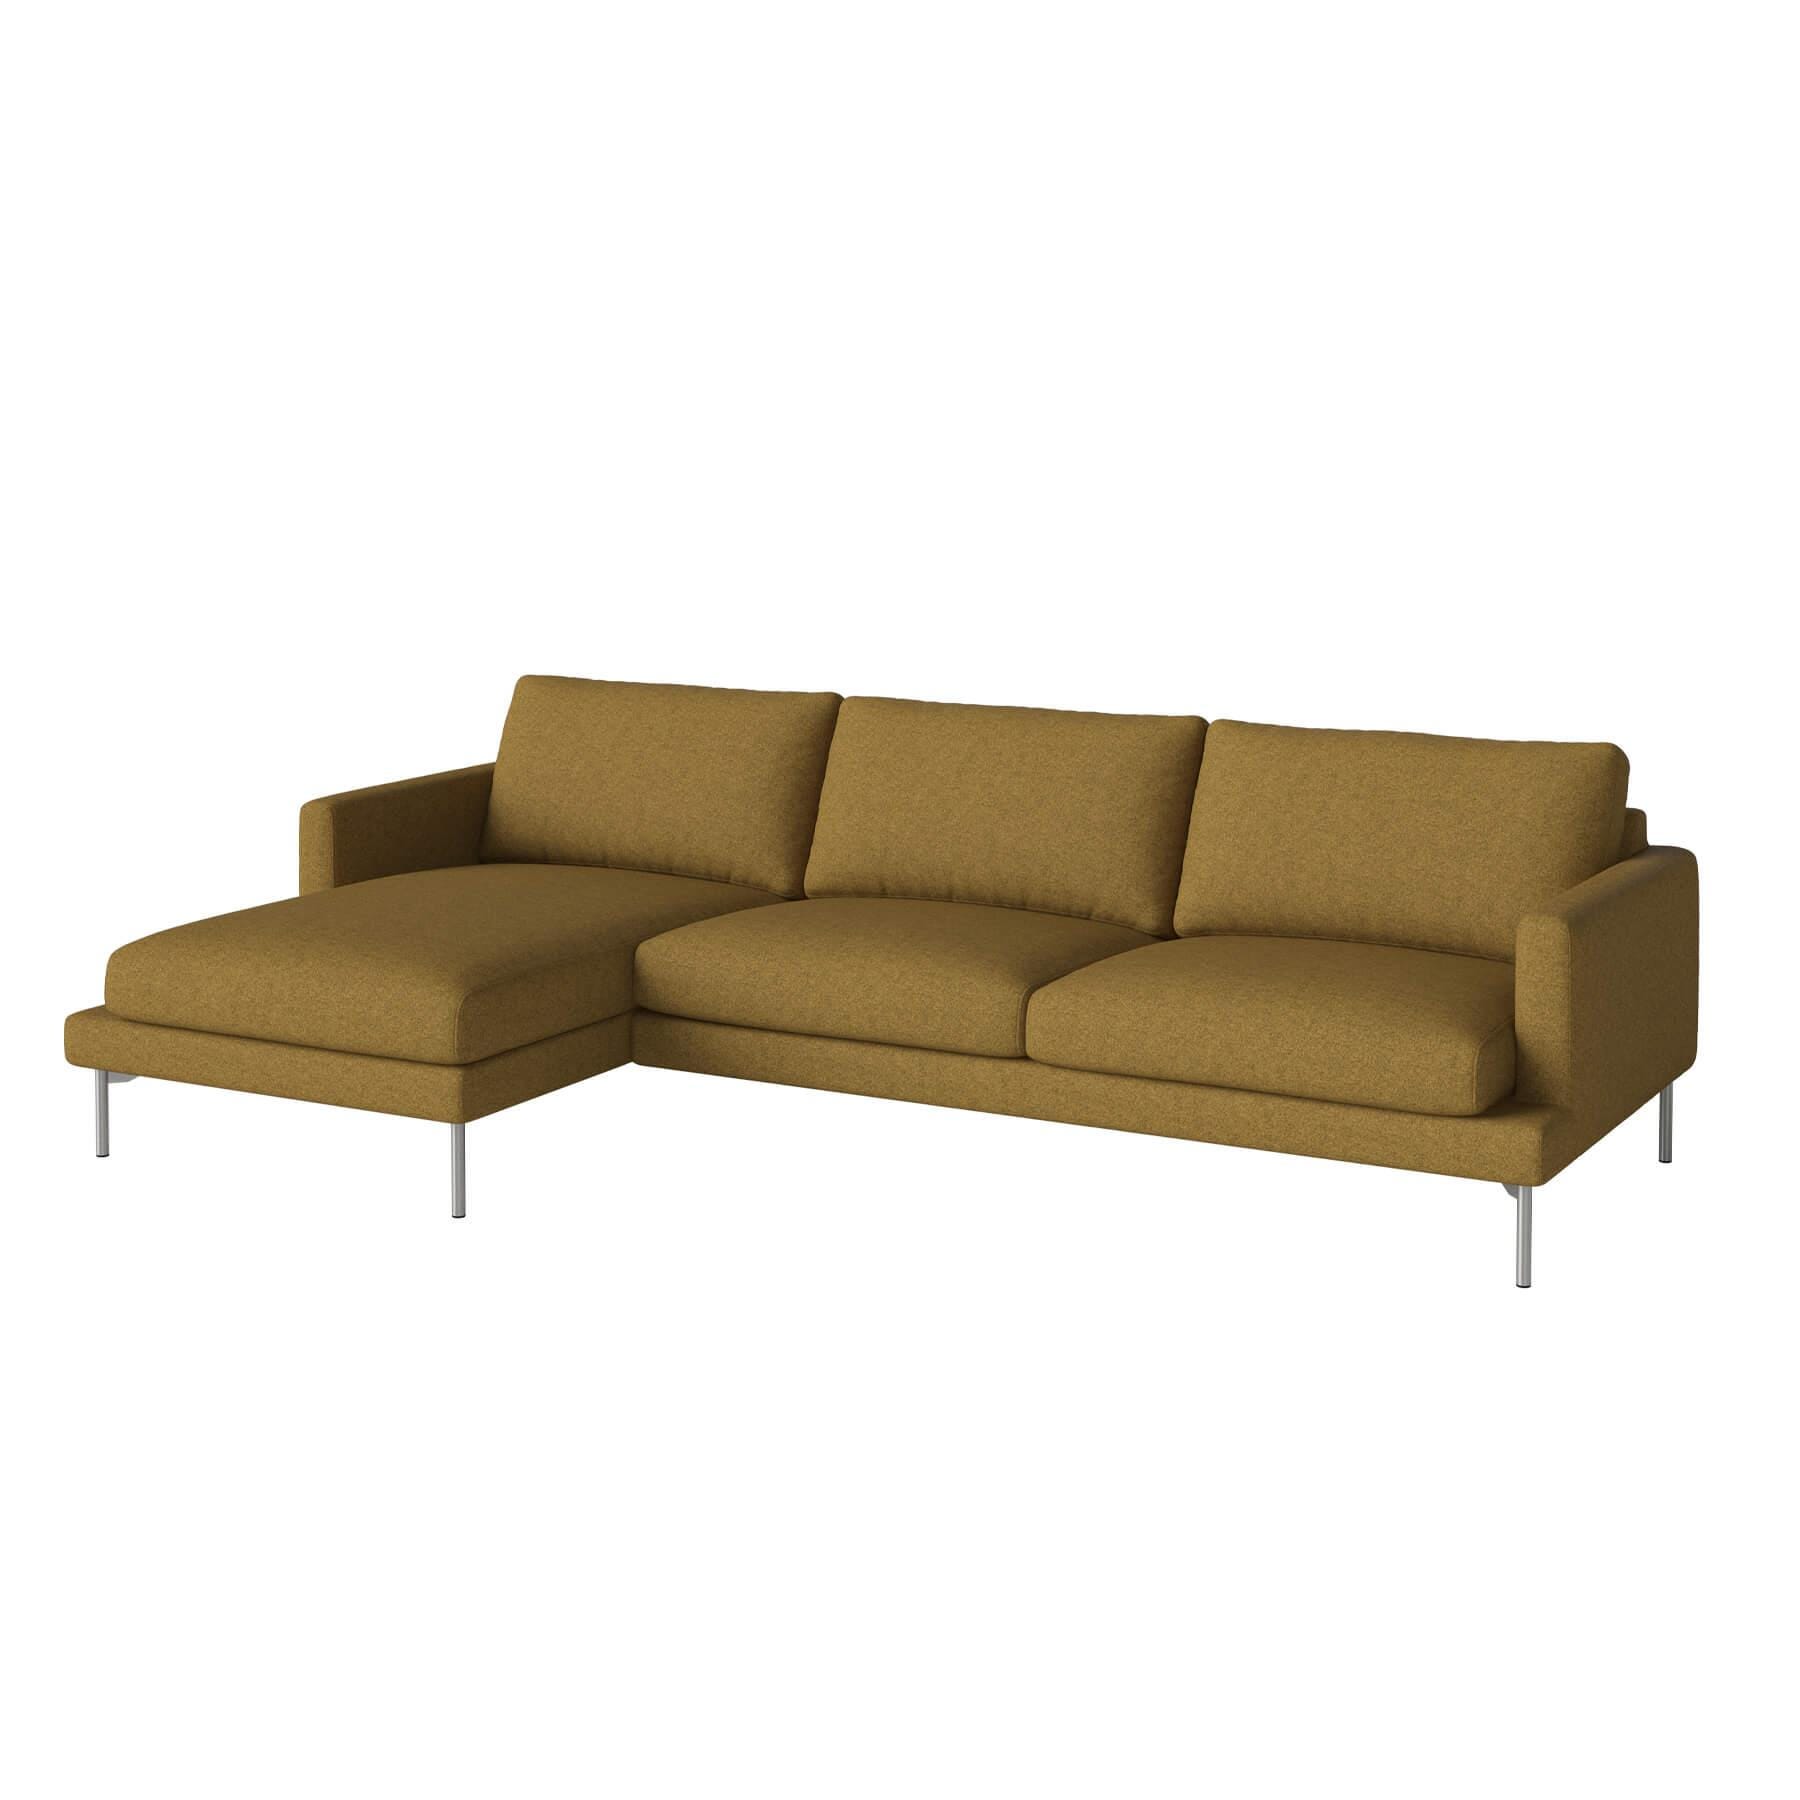 Bolia Veneda Sofa 35 Seater Sofa With Chaise Longue Brushed Steel Qual Curry Left Brown Designer Furniture From Holloways Of Ludlow